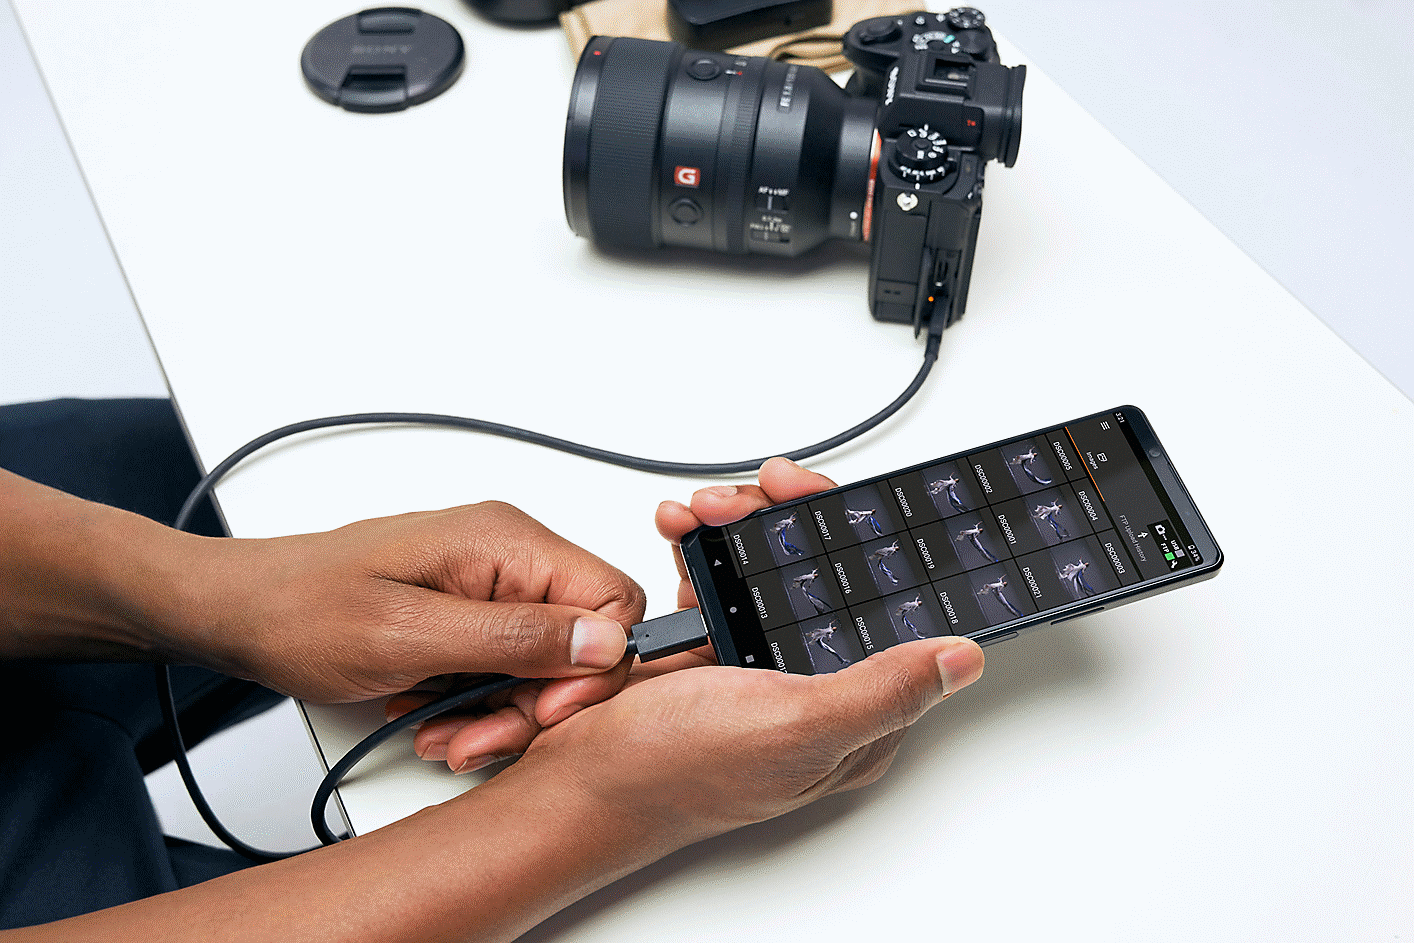 Connecting a smartphone to the α1